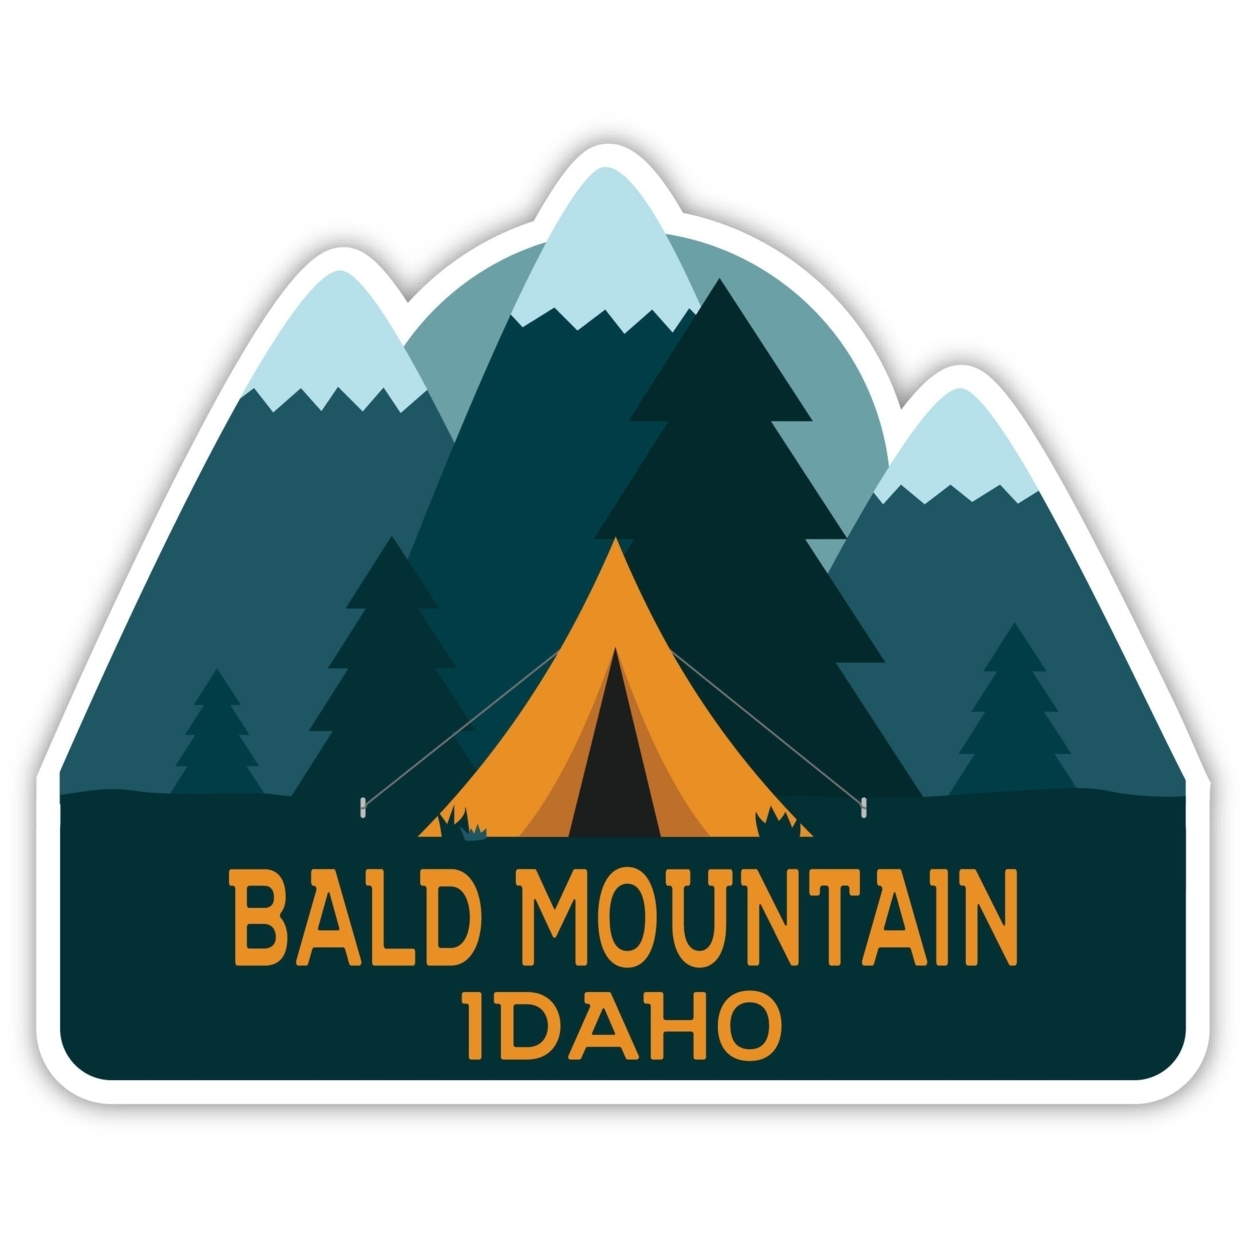 Bald Mountain Idaho Souvenir Decorative Stickers (Choose Theme And Size) - 4-Pack, 4-Inch, Tent